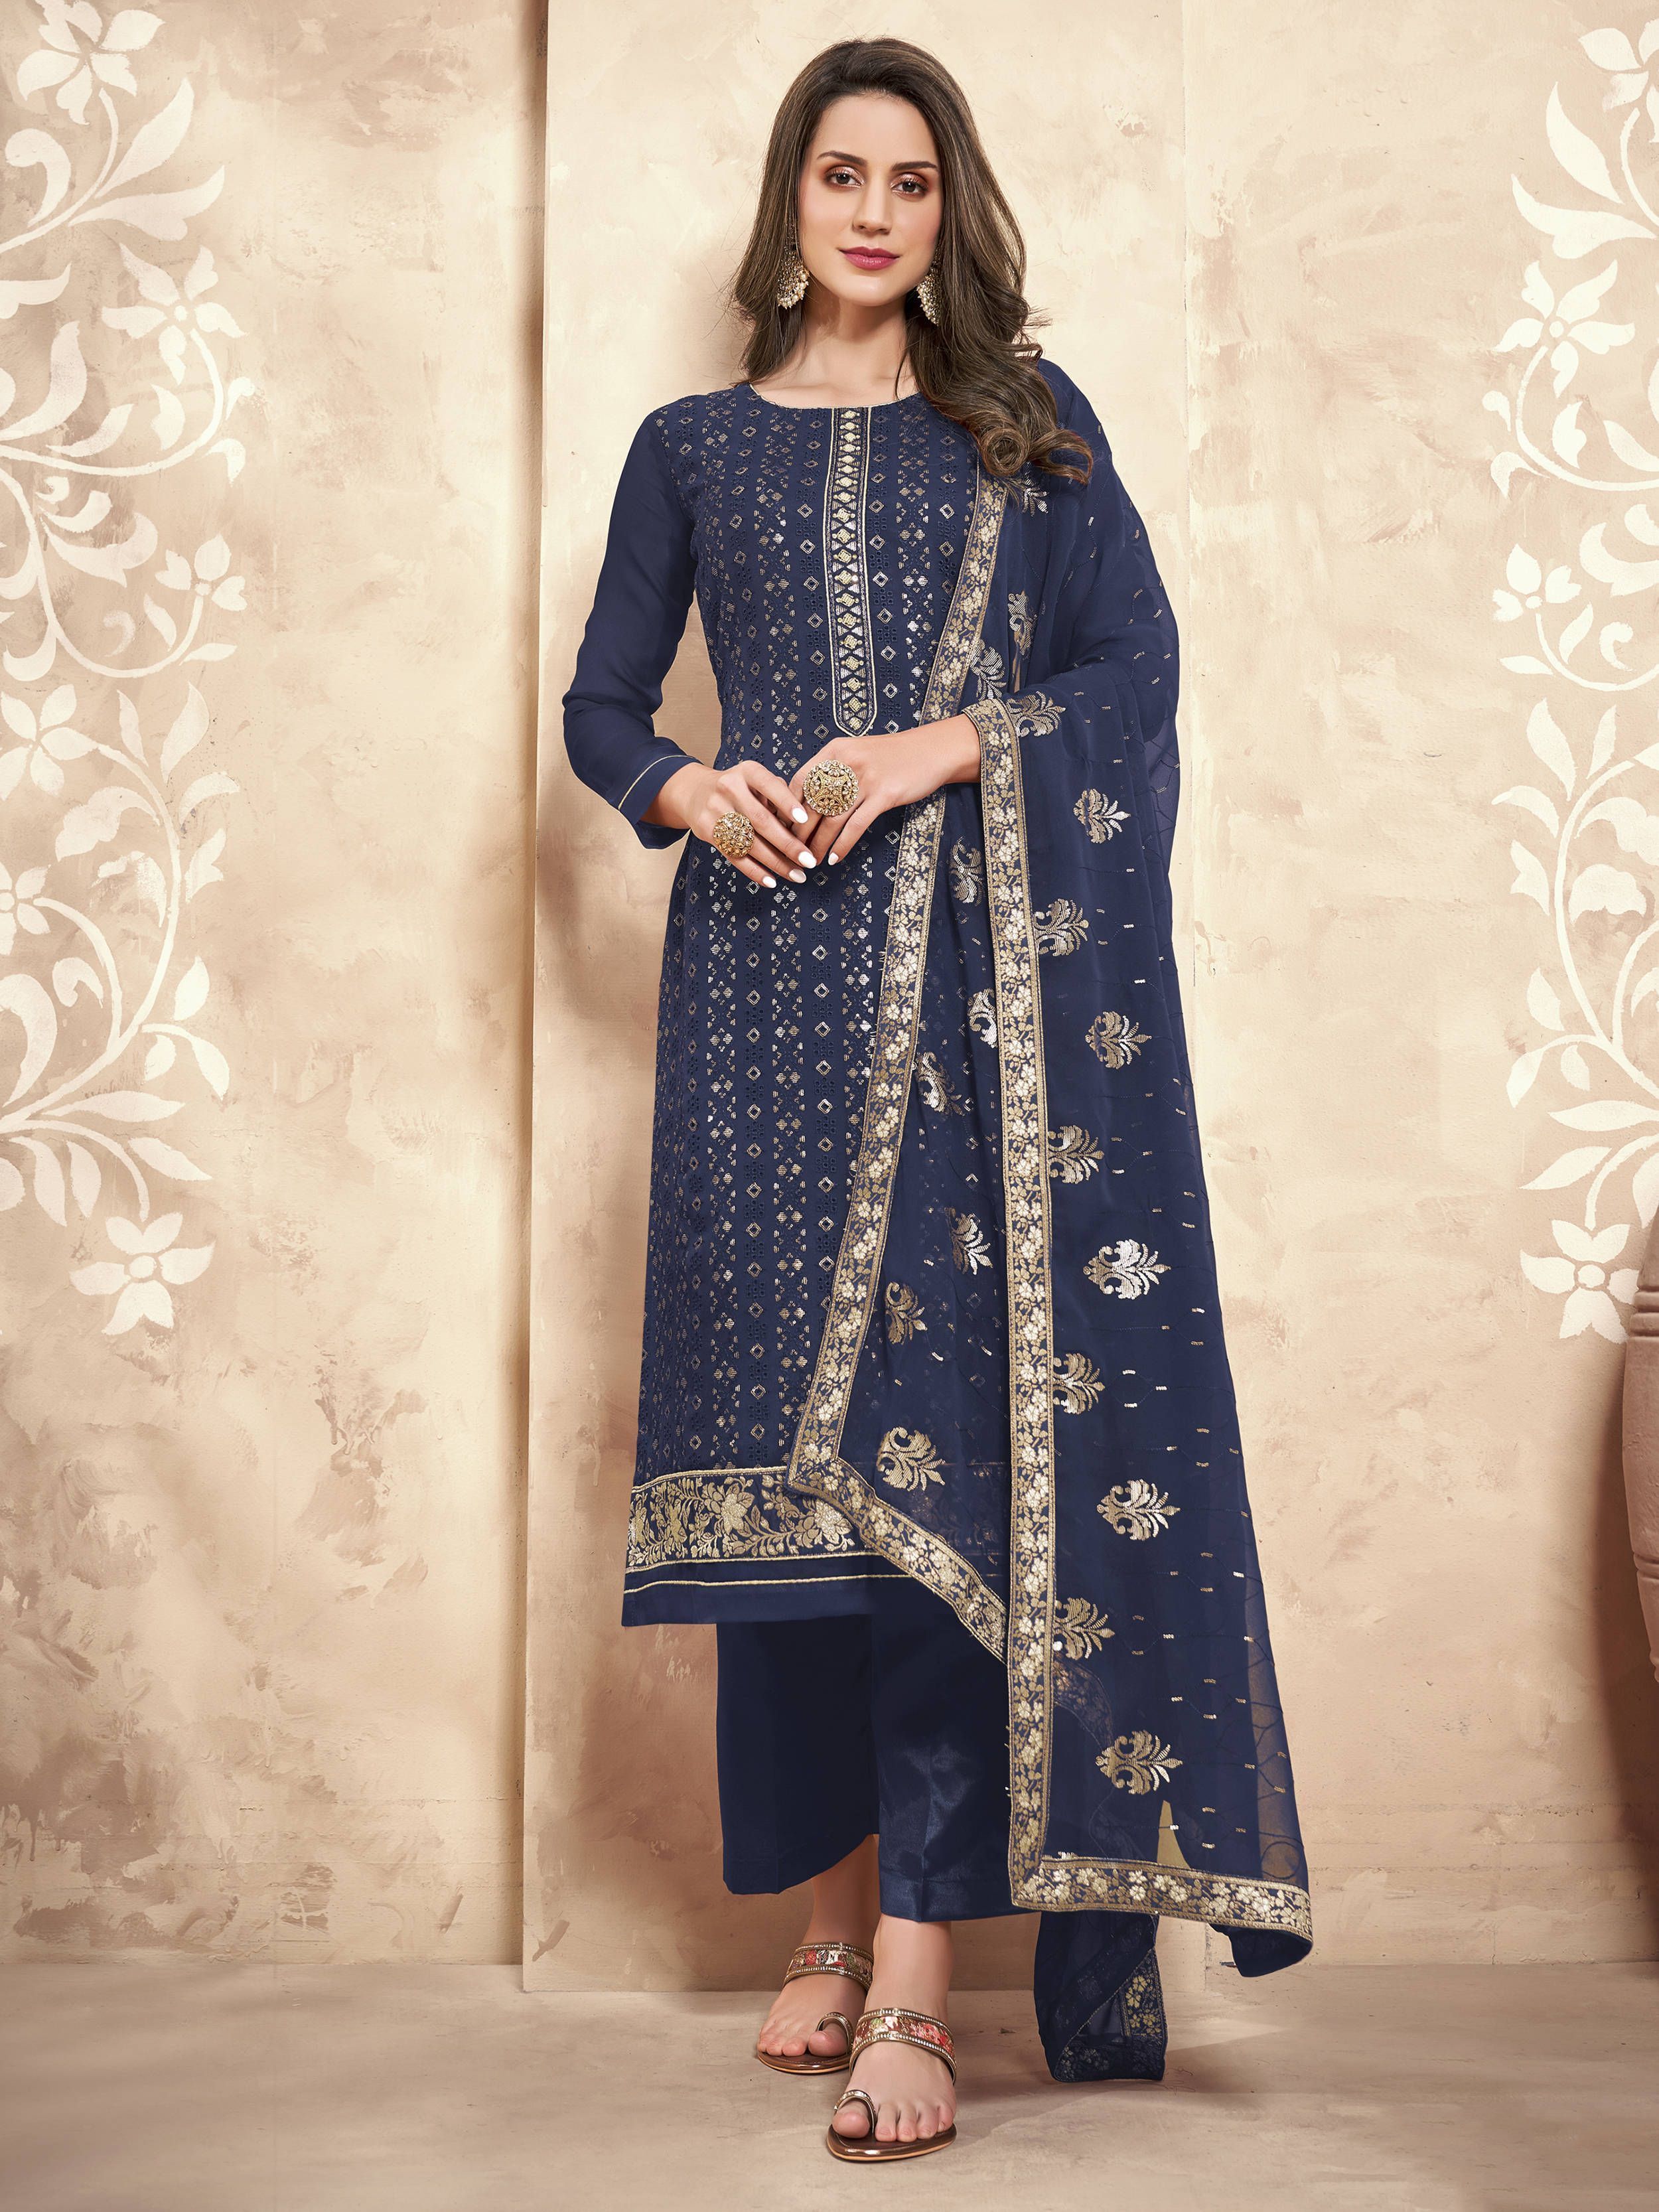 Blue Color Semistitched Salwar Suite In Georgette Fabric - Zakarto